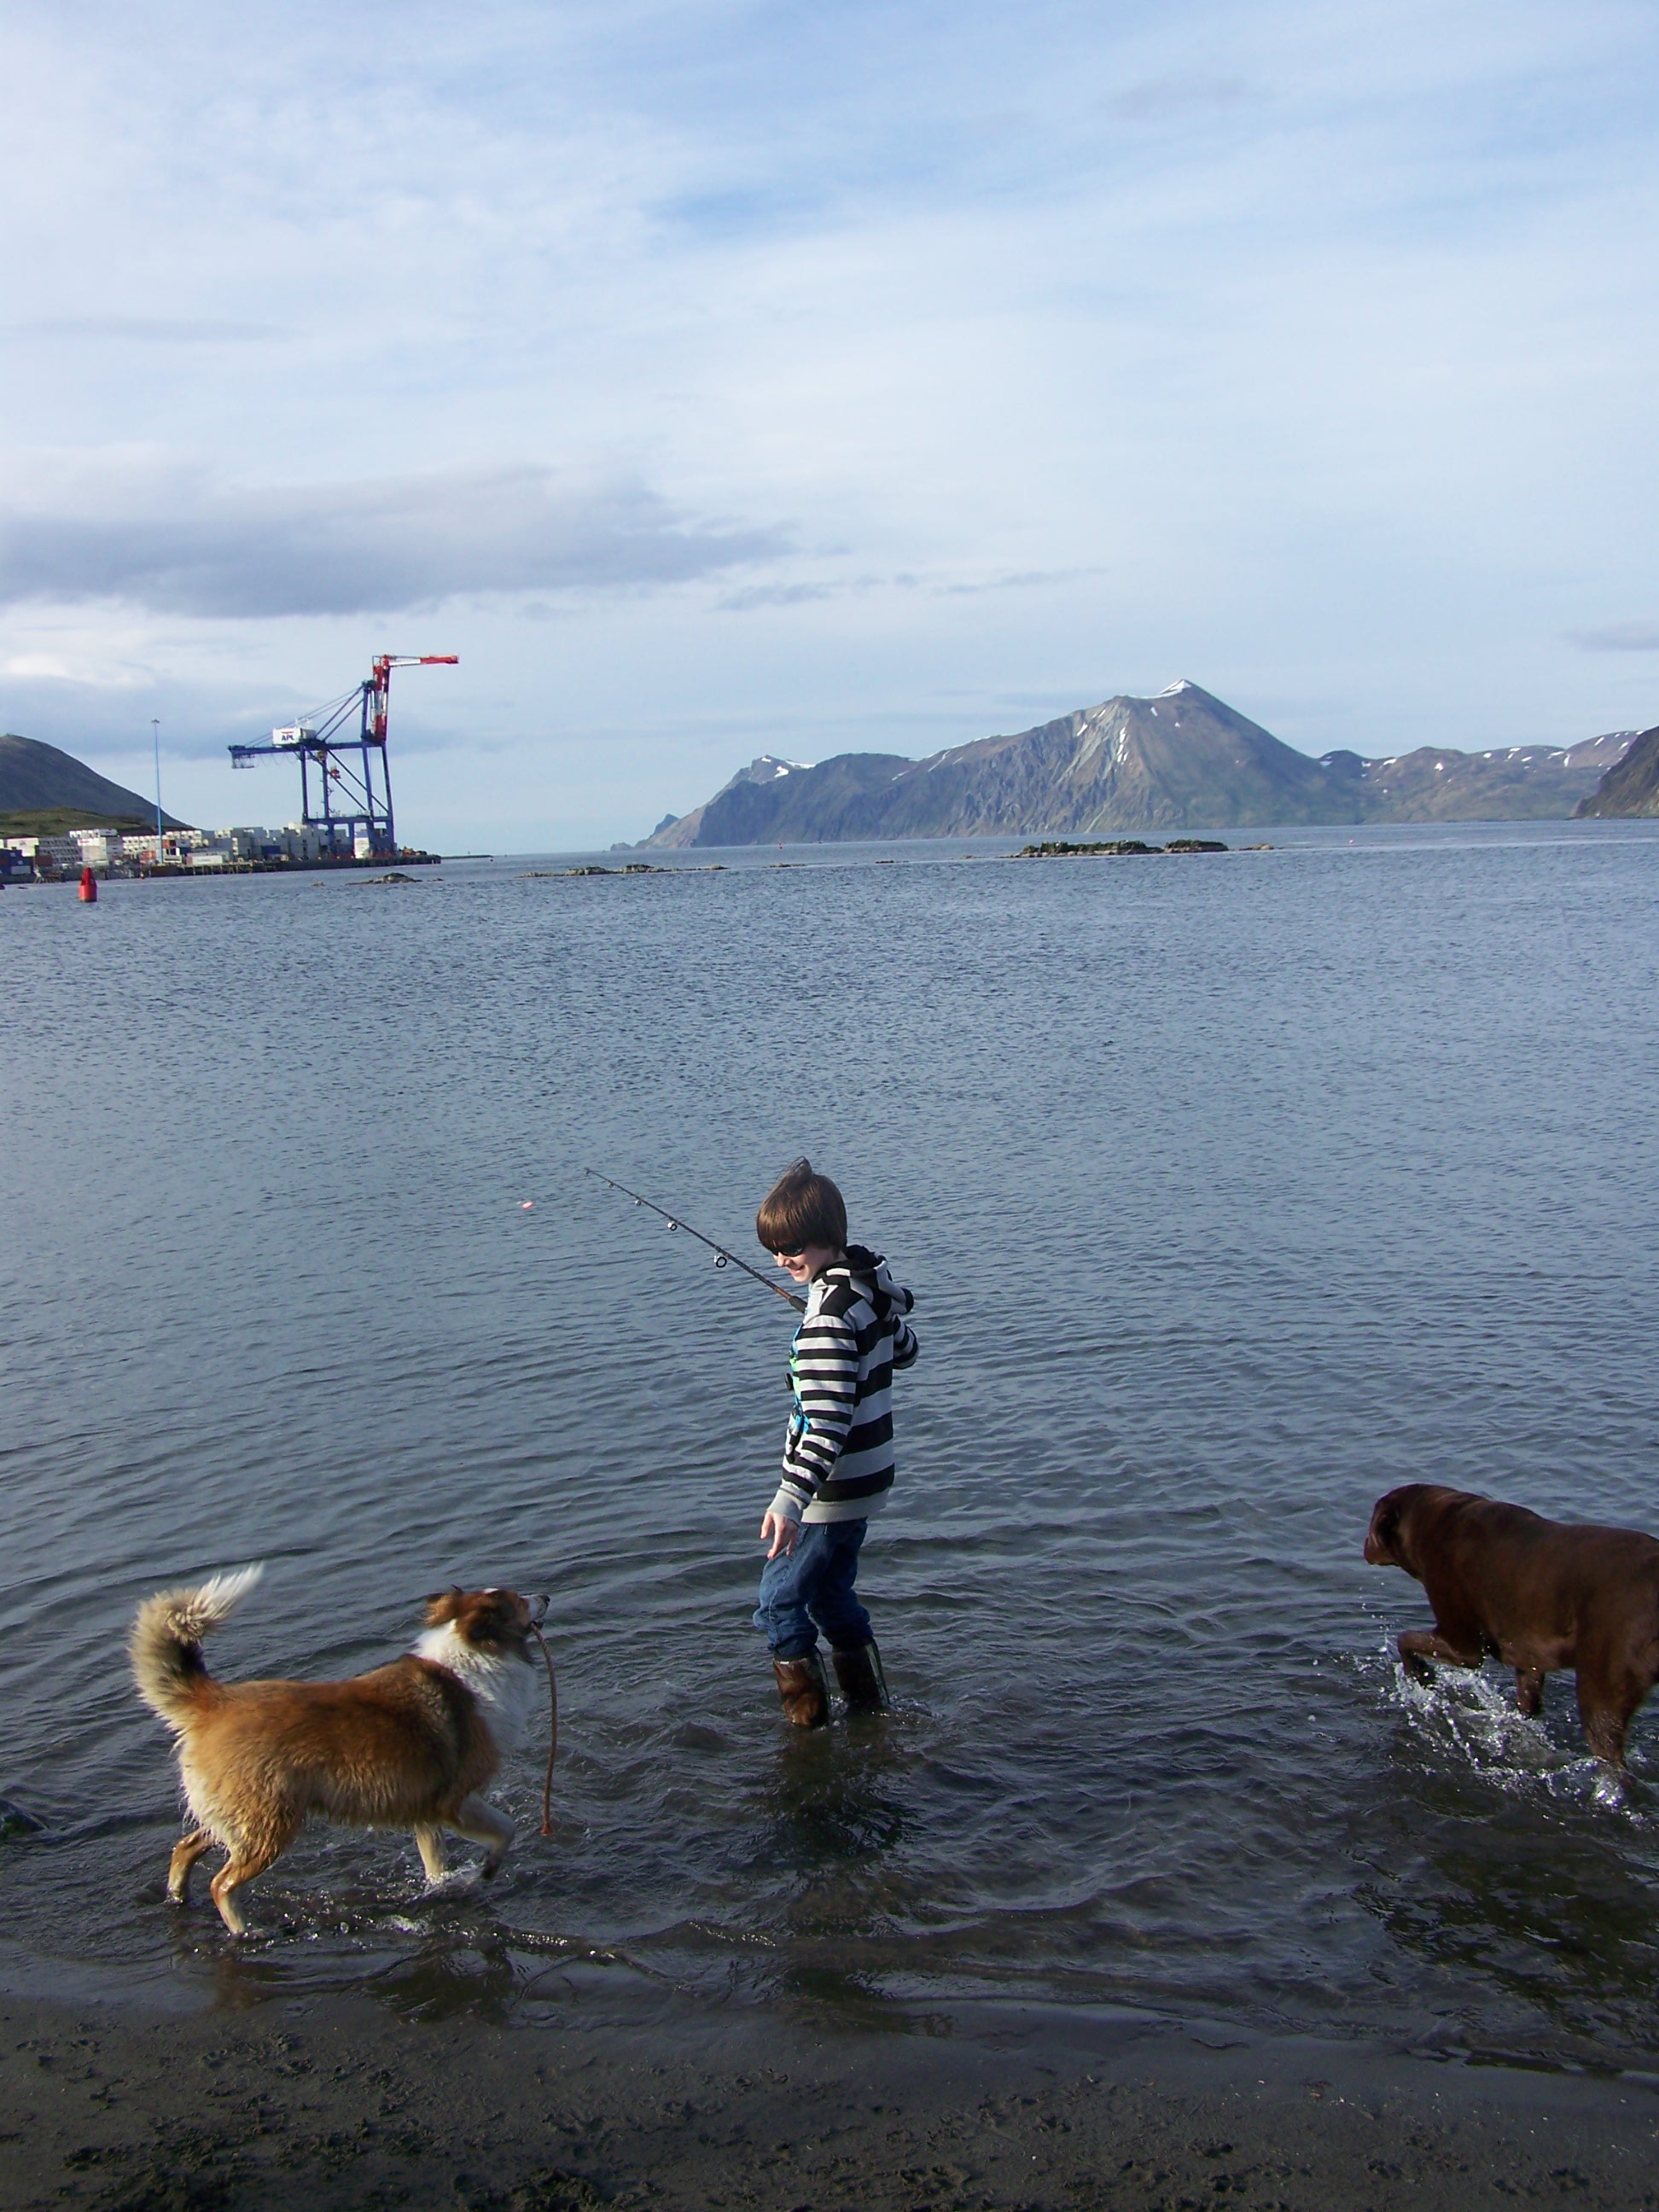 Boy Fishing with his dogs (Photo by Cathy Jordan)